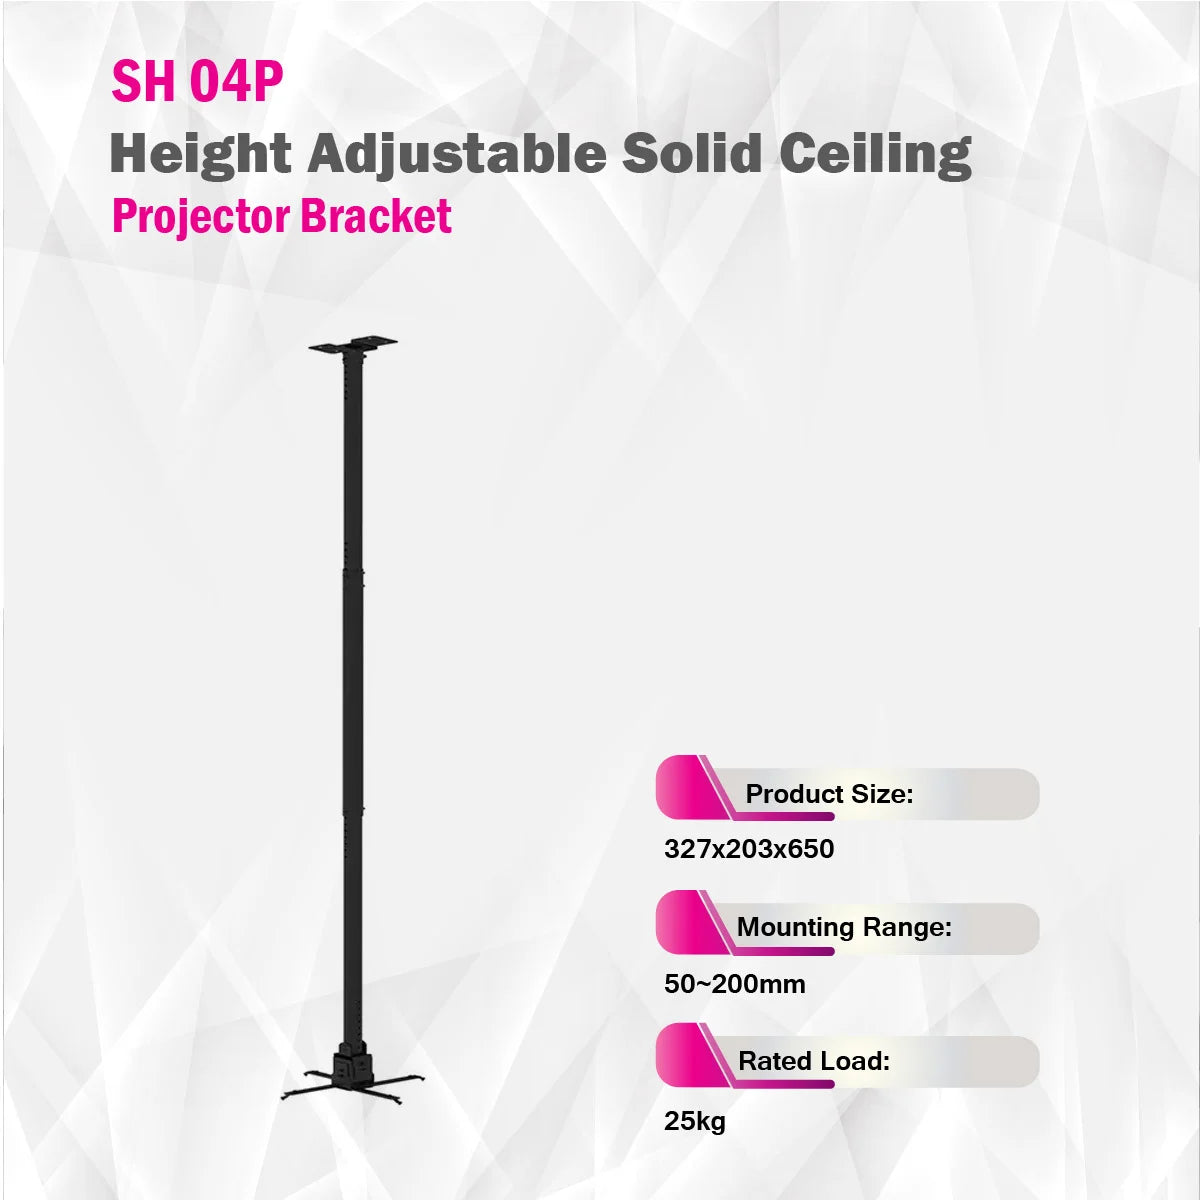 Skill Tech SH 04P - Height Adjustable Solid Ceiling Projector Bracket